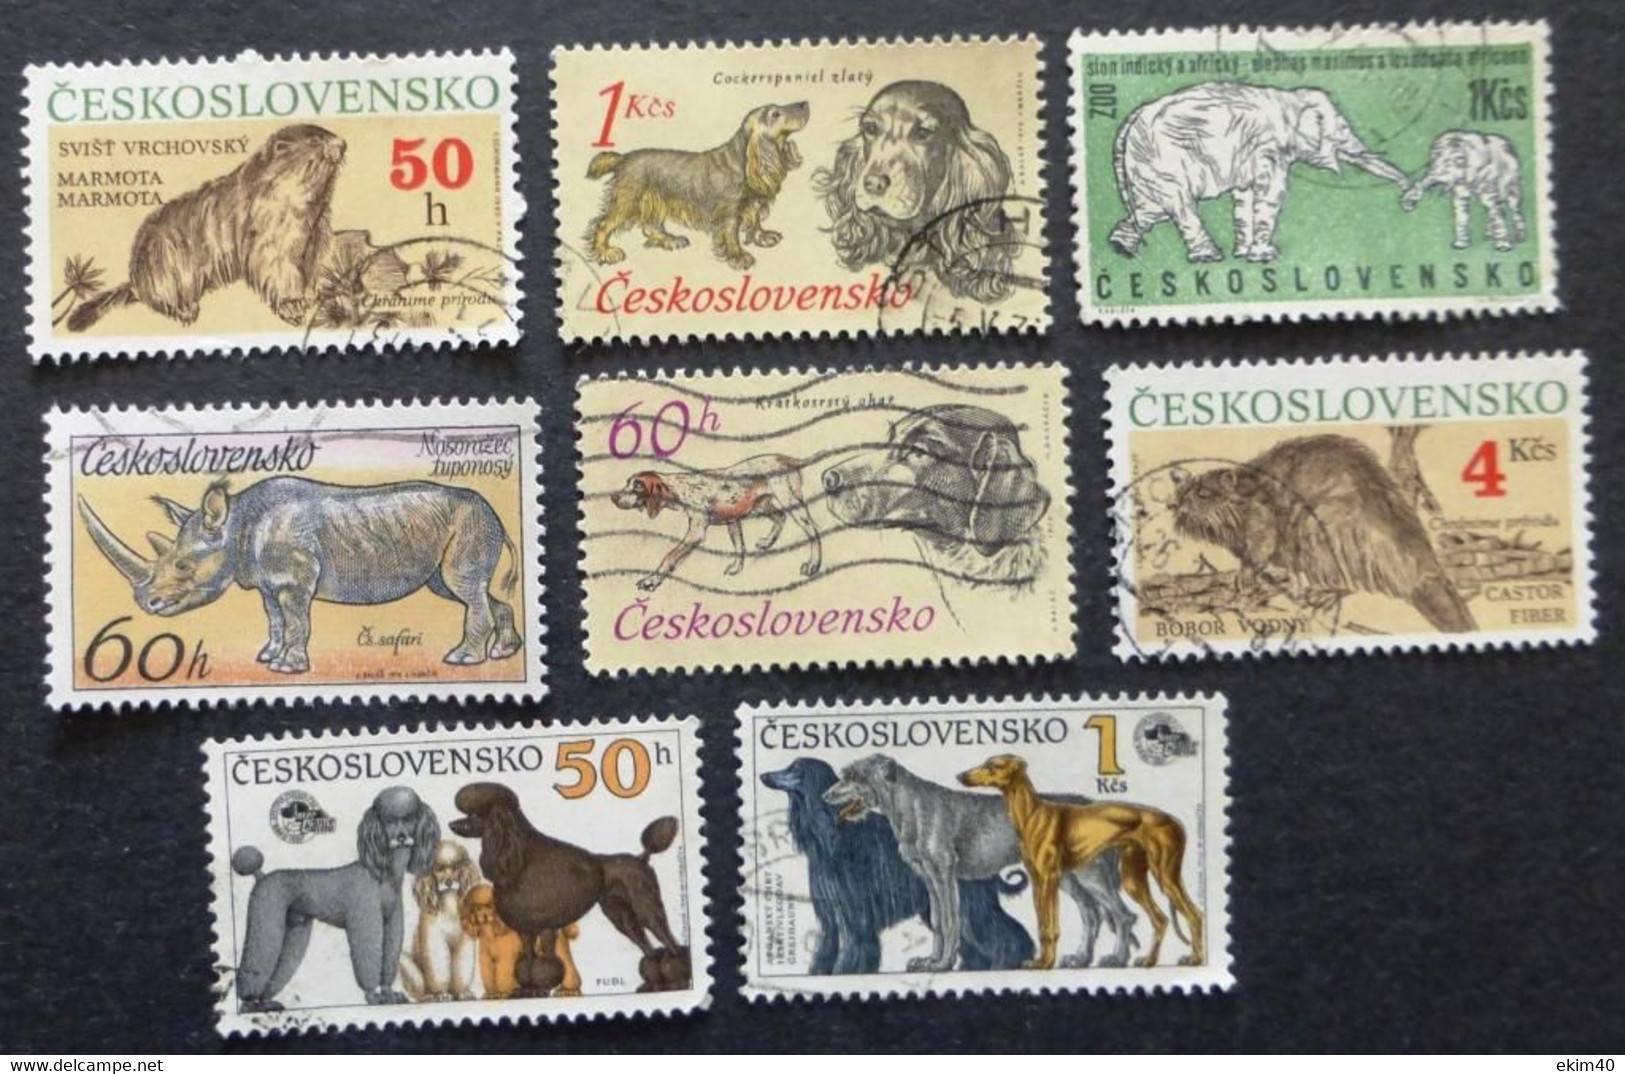 Selection Of Used/Cancelled Stamps From Czechoslovakia Wild & Domestic Animals. No DC-354 - Used Stamps